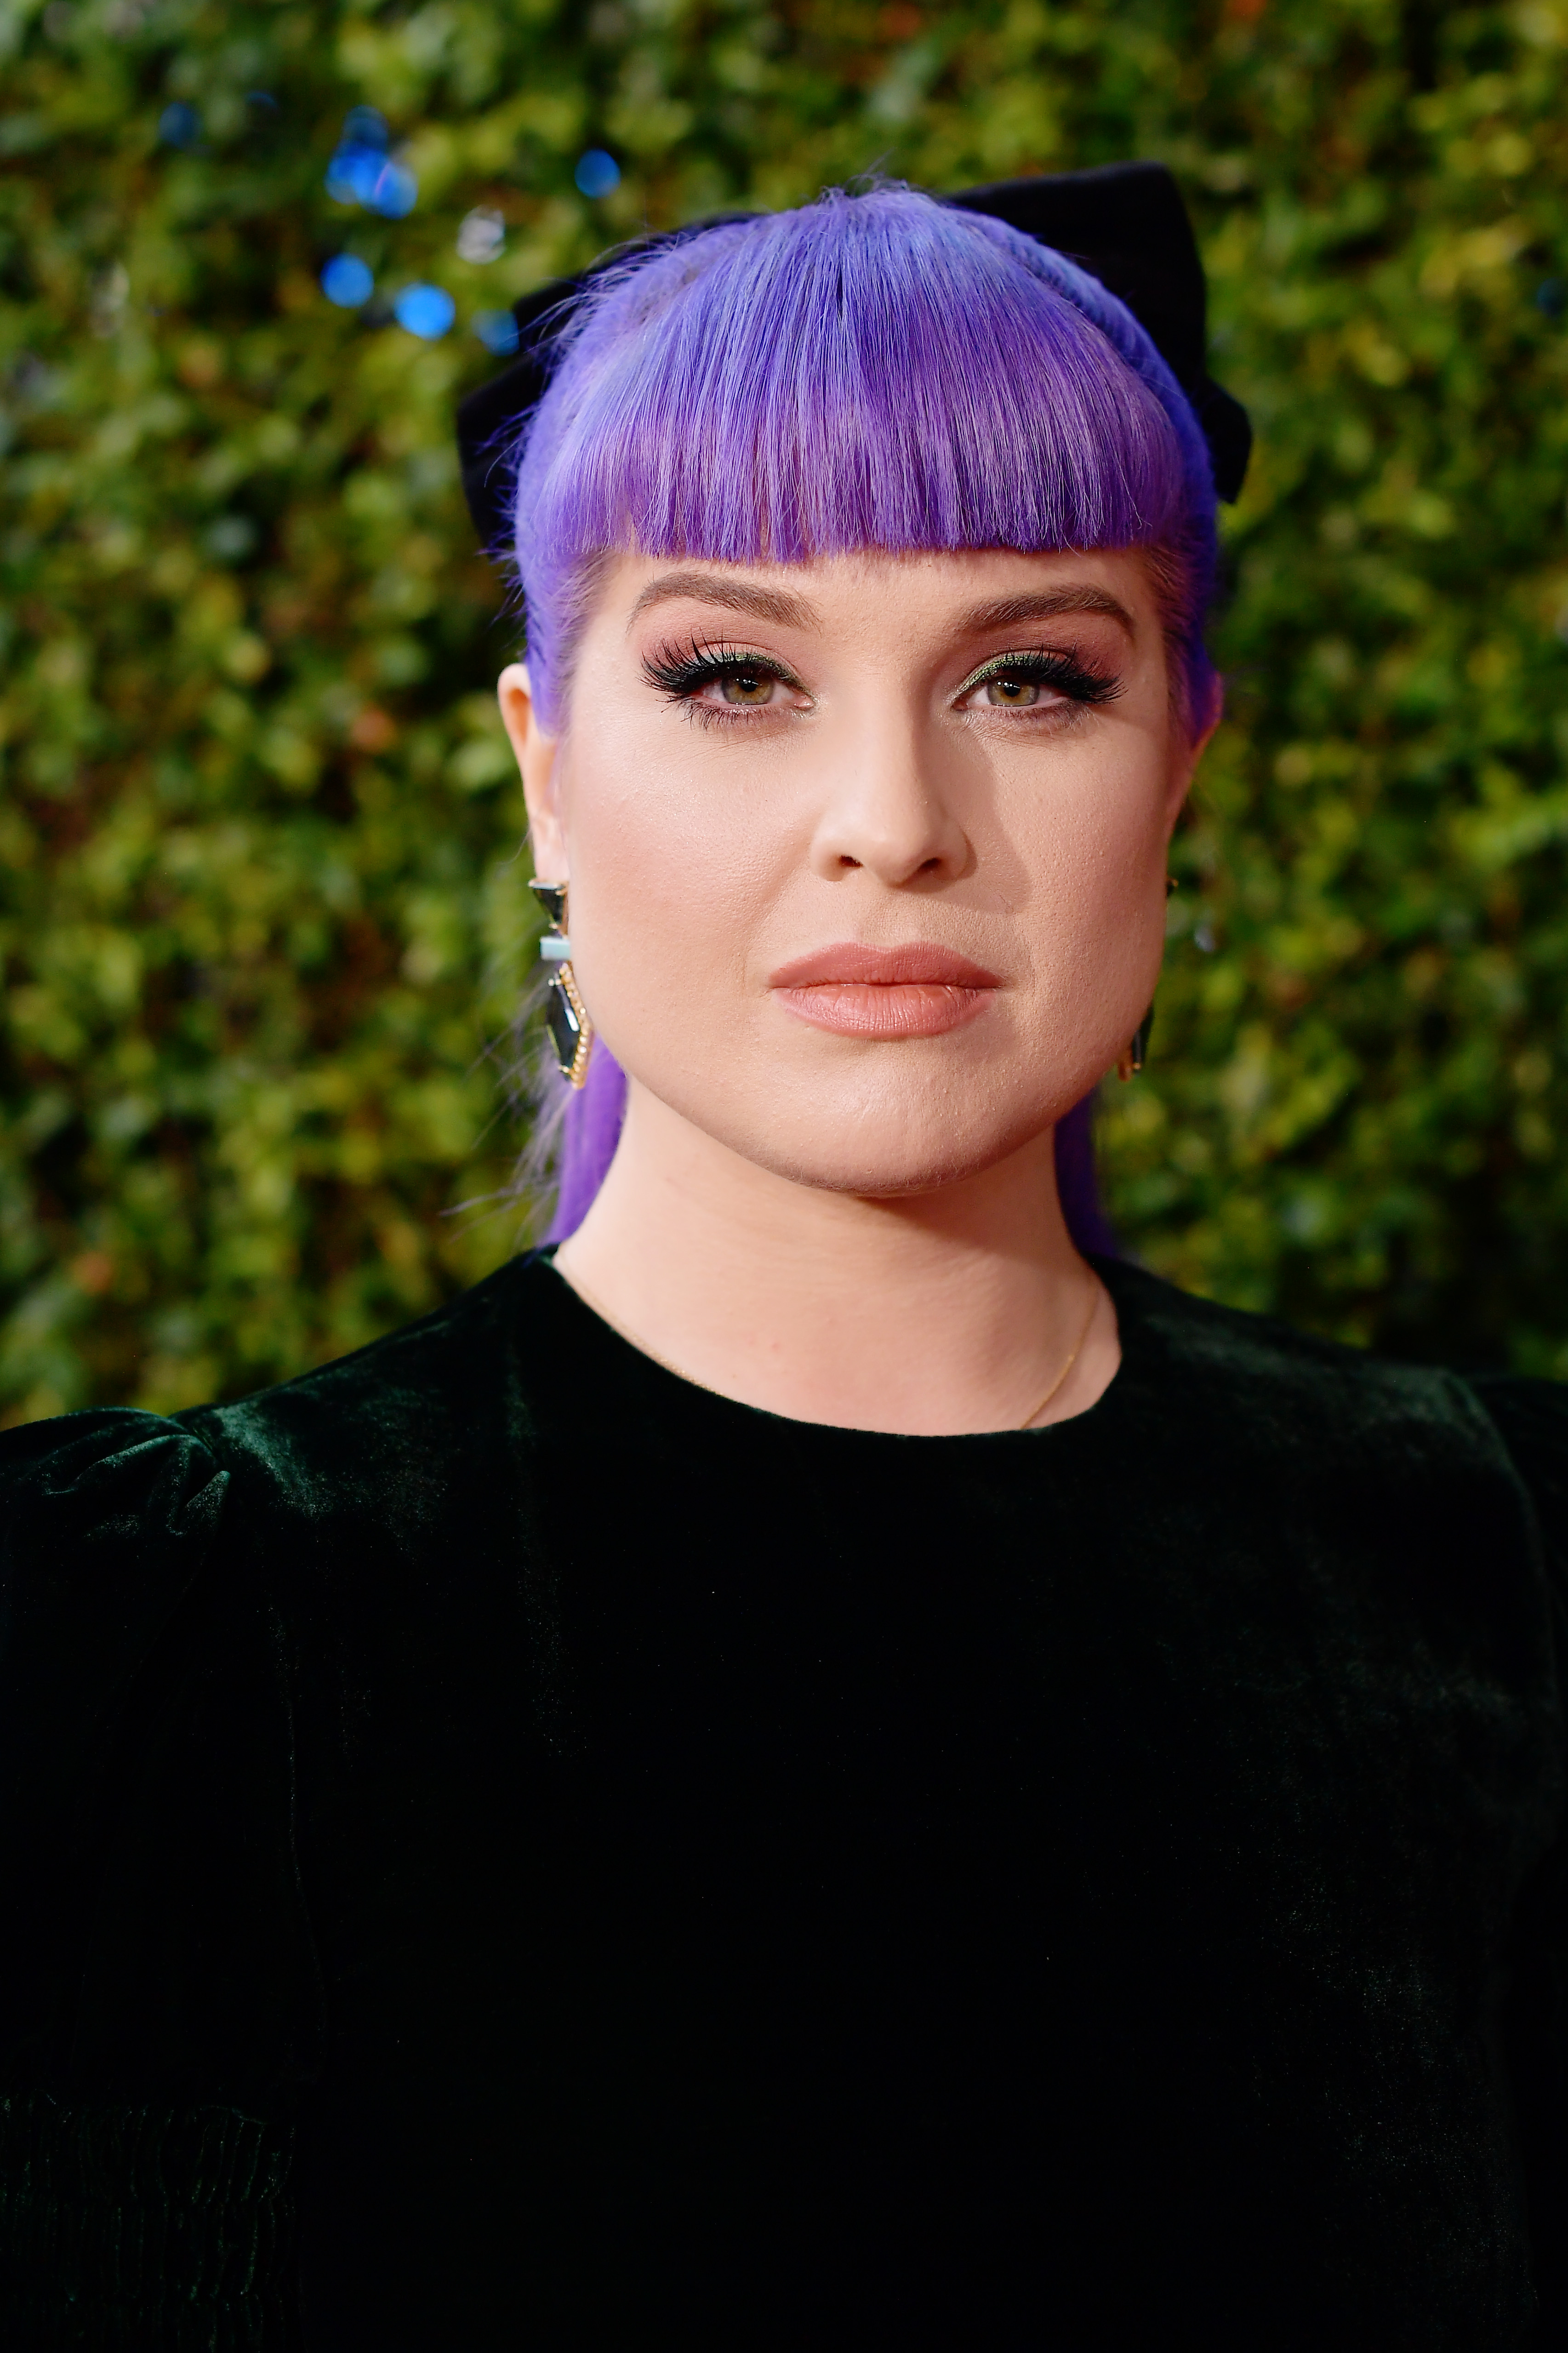 Kelly Osbourne attends the 2019 American Music Awards at Microsoft Theater on November 24, 2019 in Los Angeles, California | Source: Getty Images